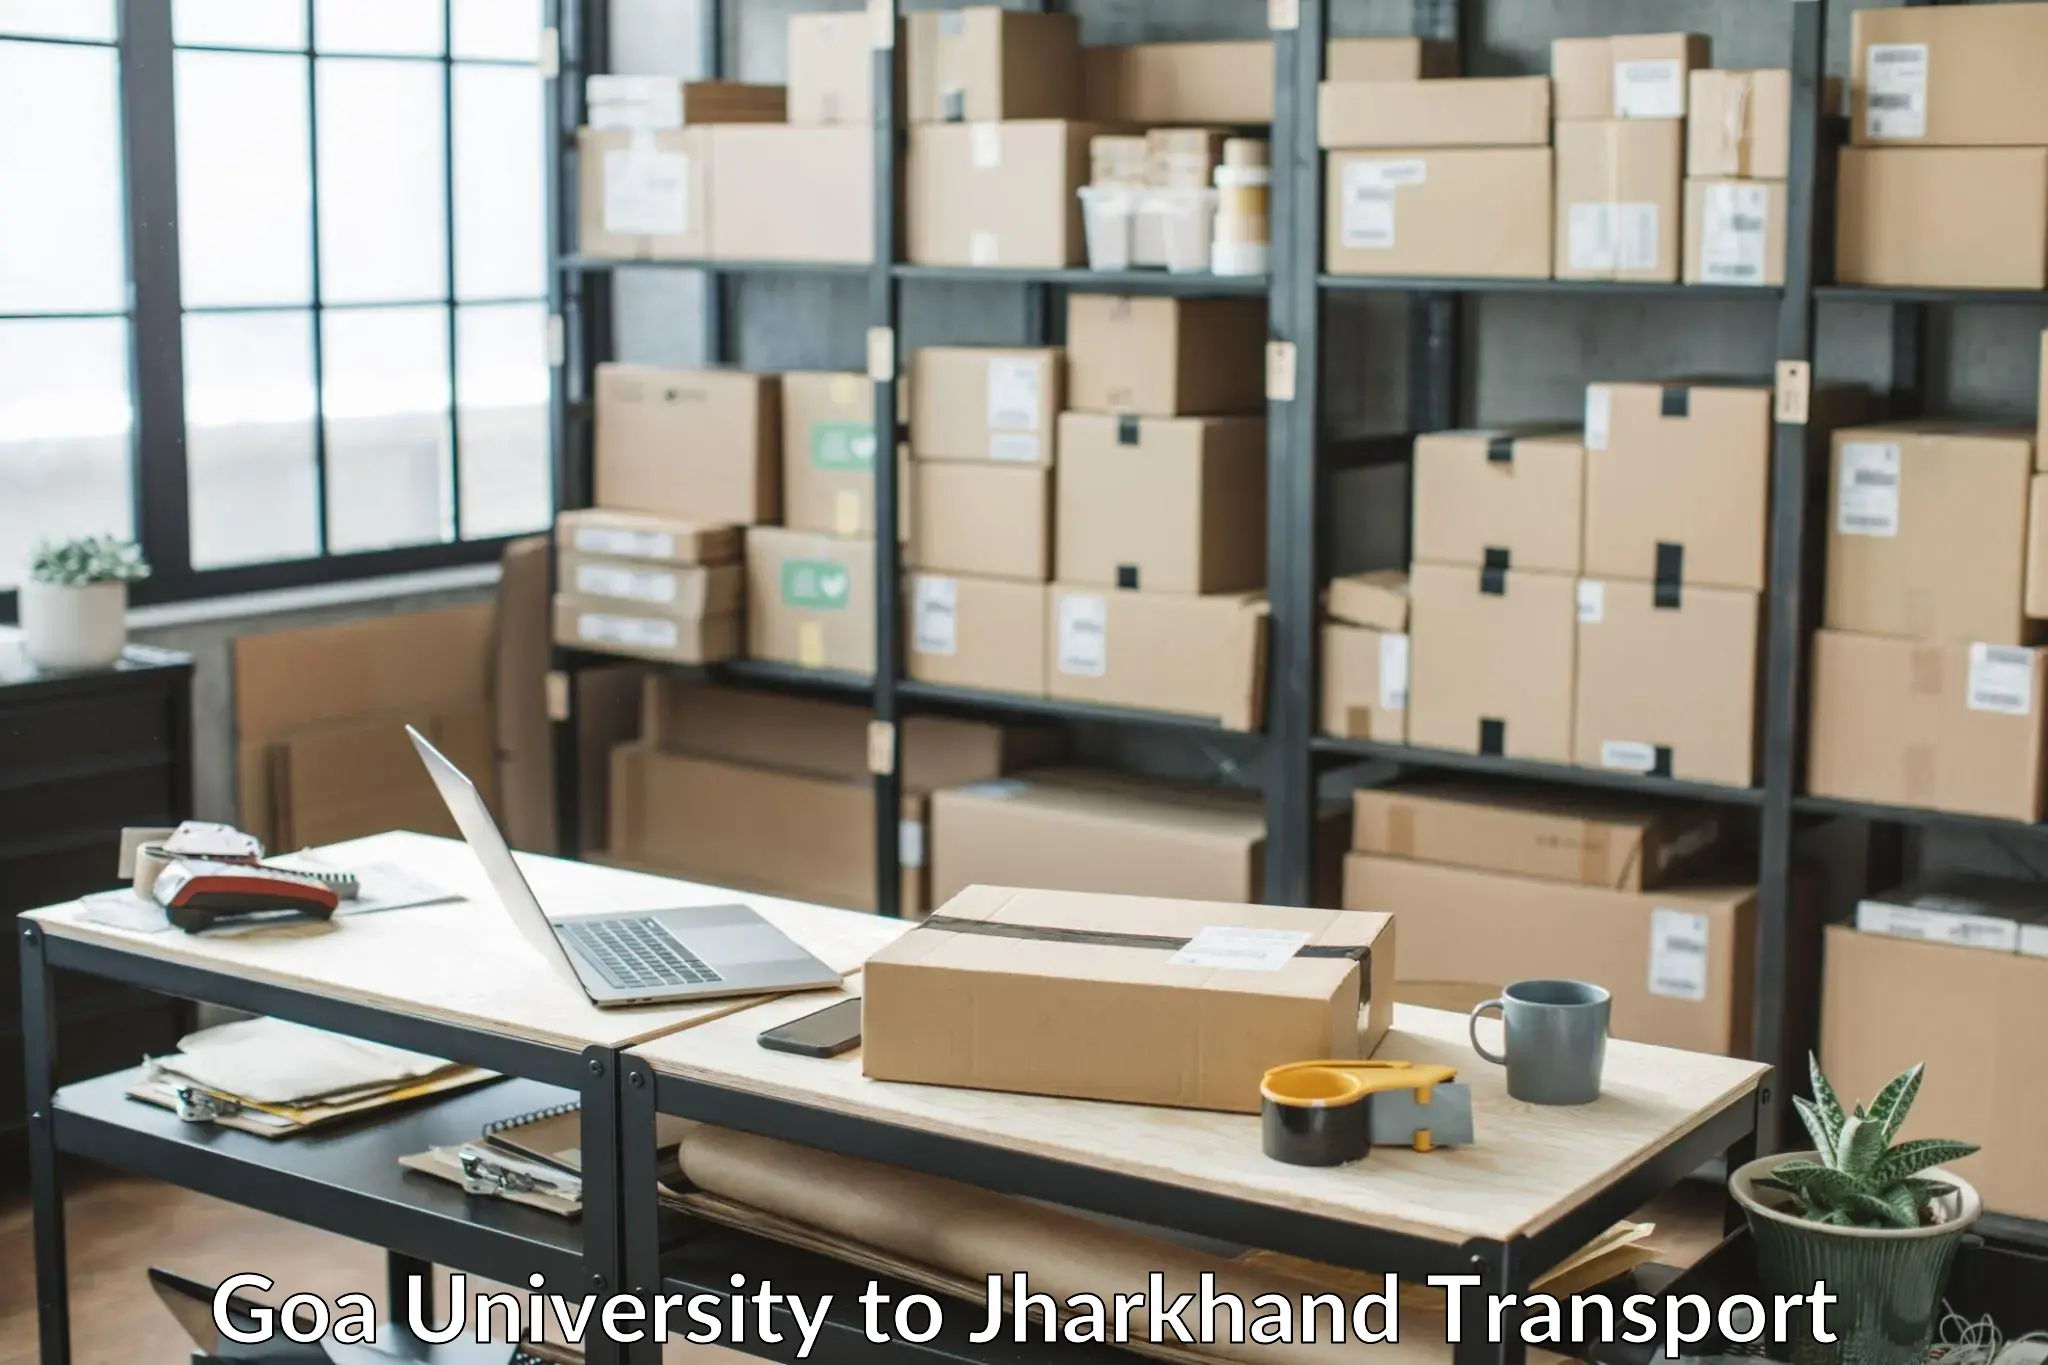 Package delivery services Goa University to Shikaripara